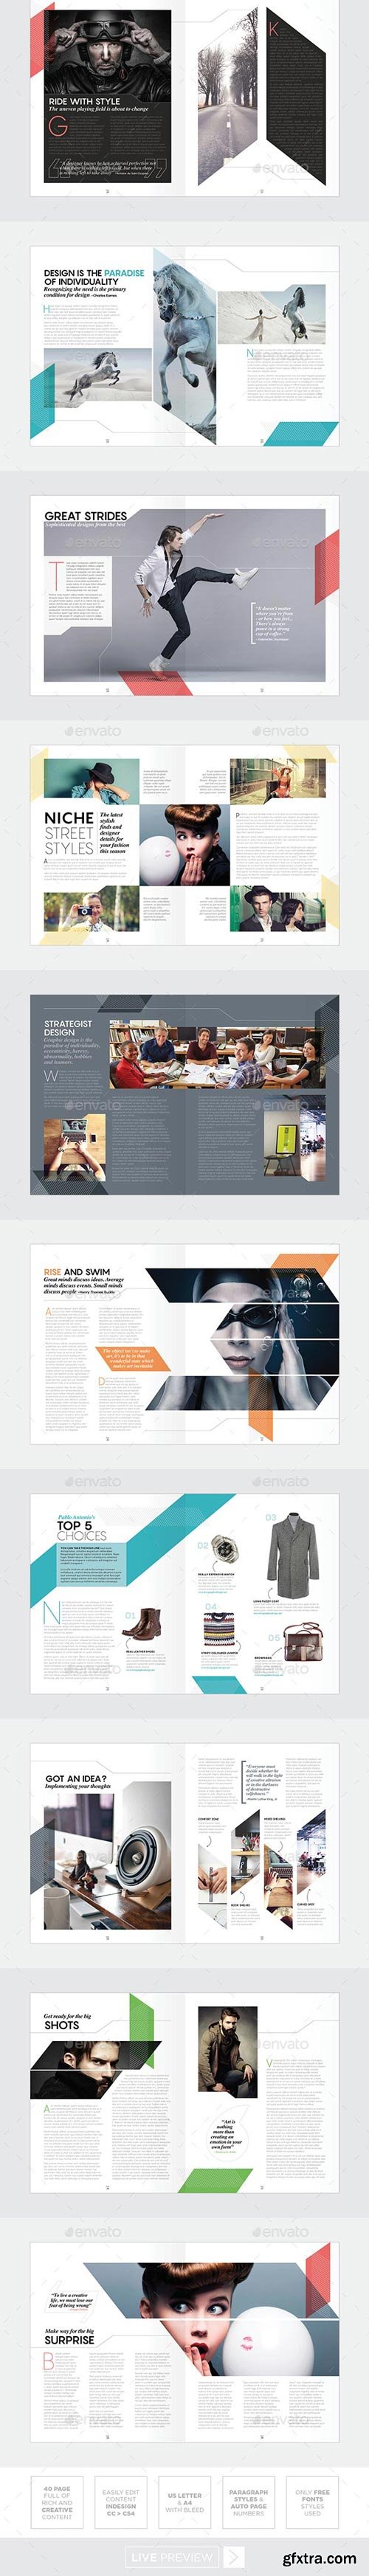 GraphicRiver - Magazine Template - InDesign 40 Page Layout V9 - 19416164